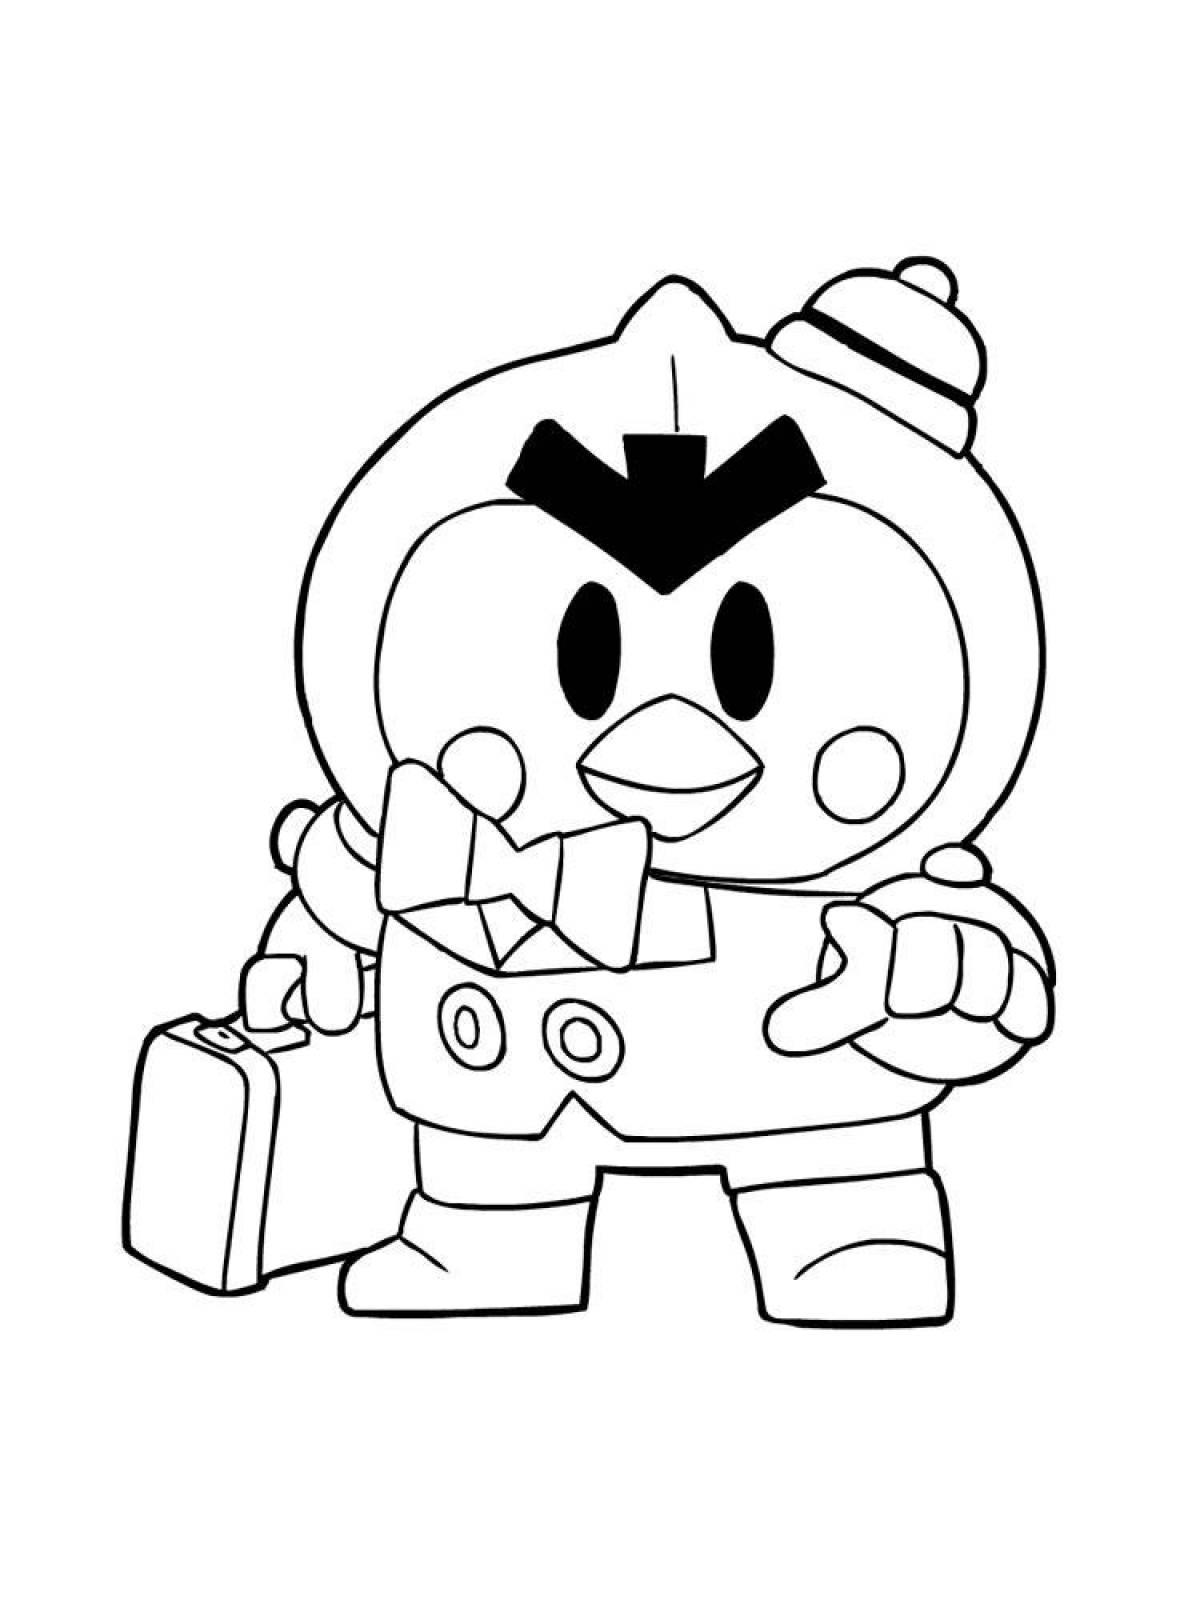 Animated brawl stars coloring pages